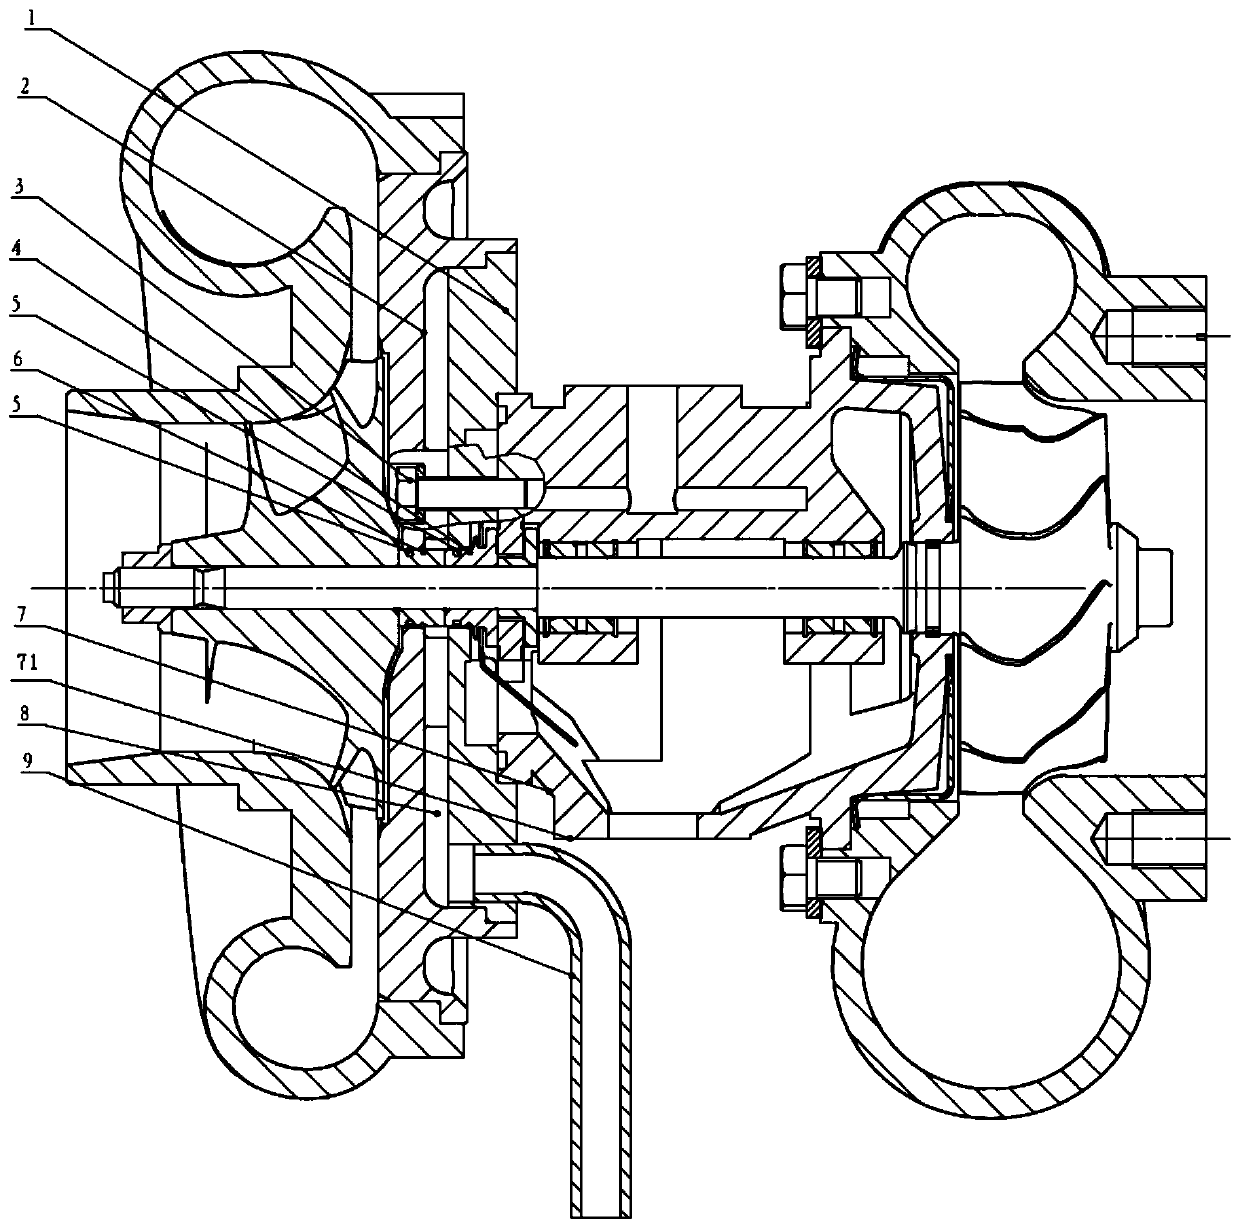 Independent measuring structure for air leakage of compressor end and turbine end of turbocharger